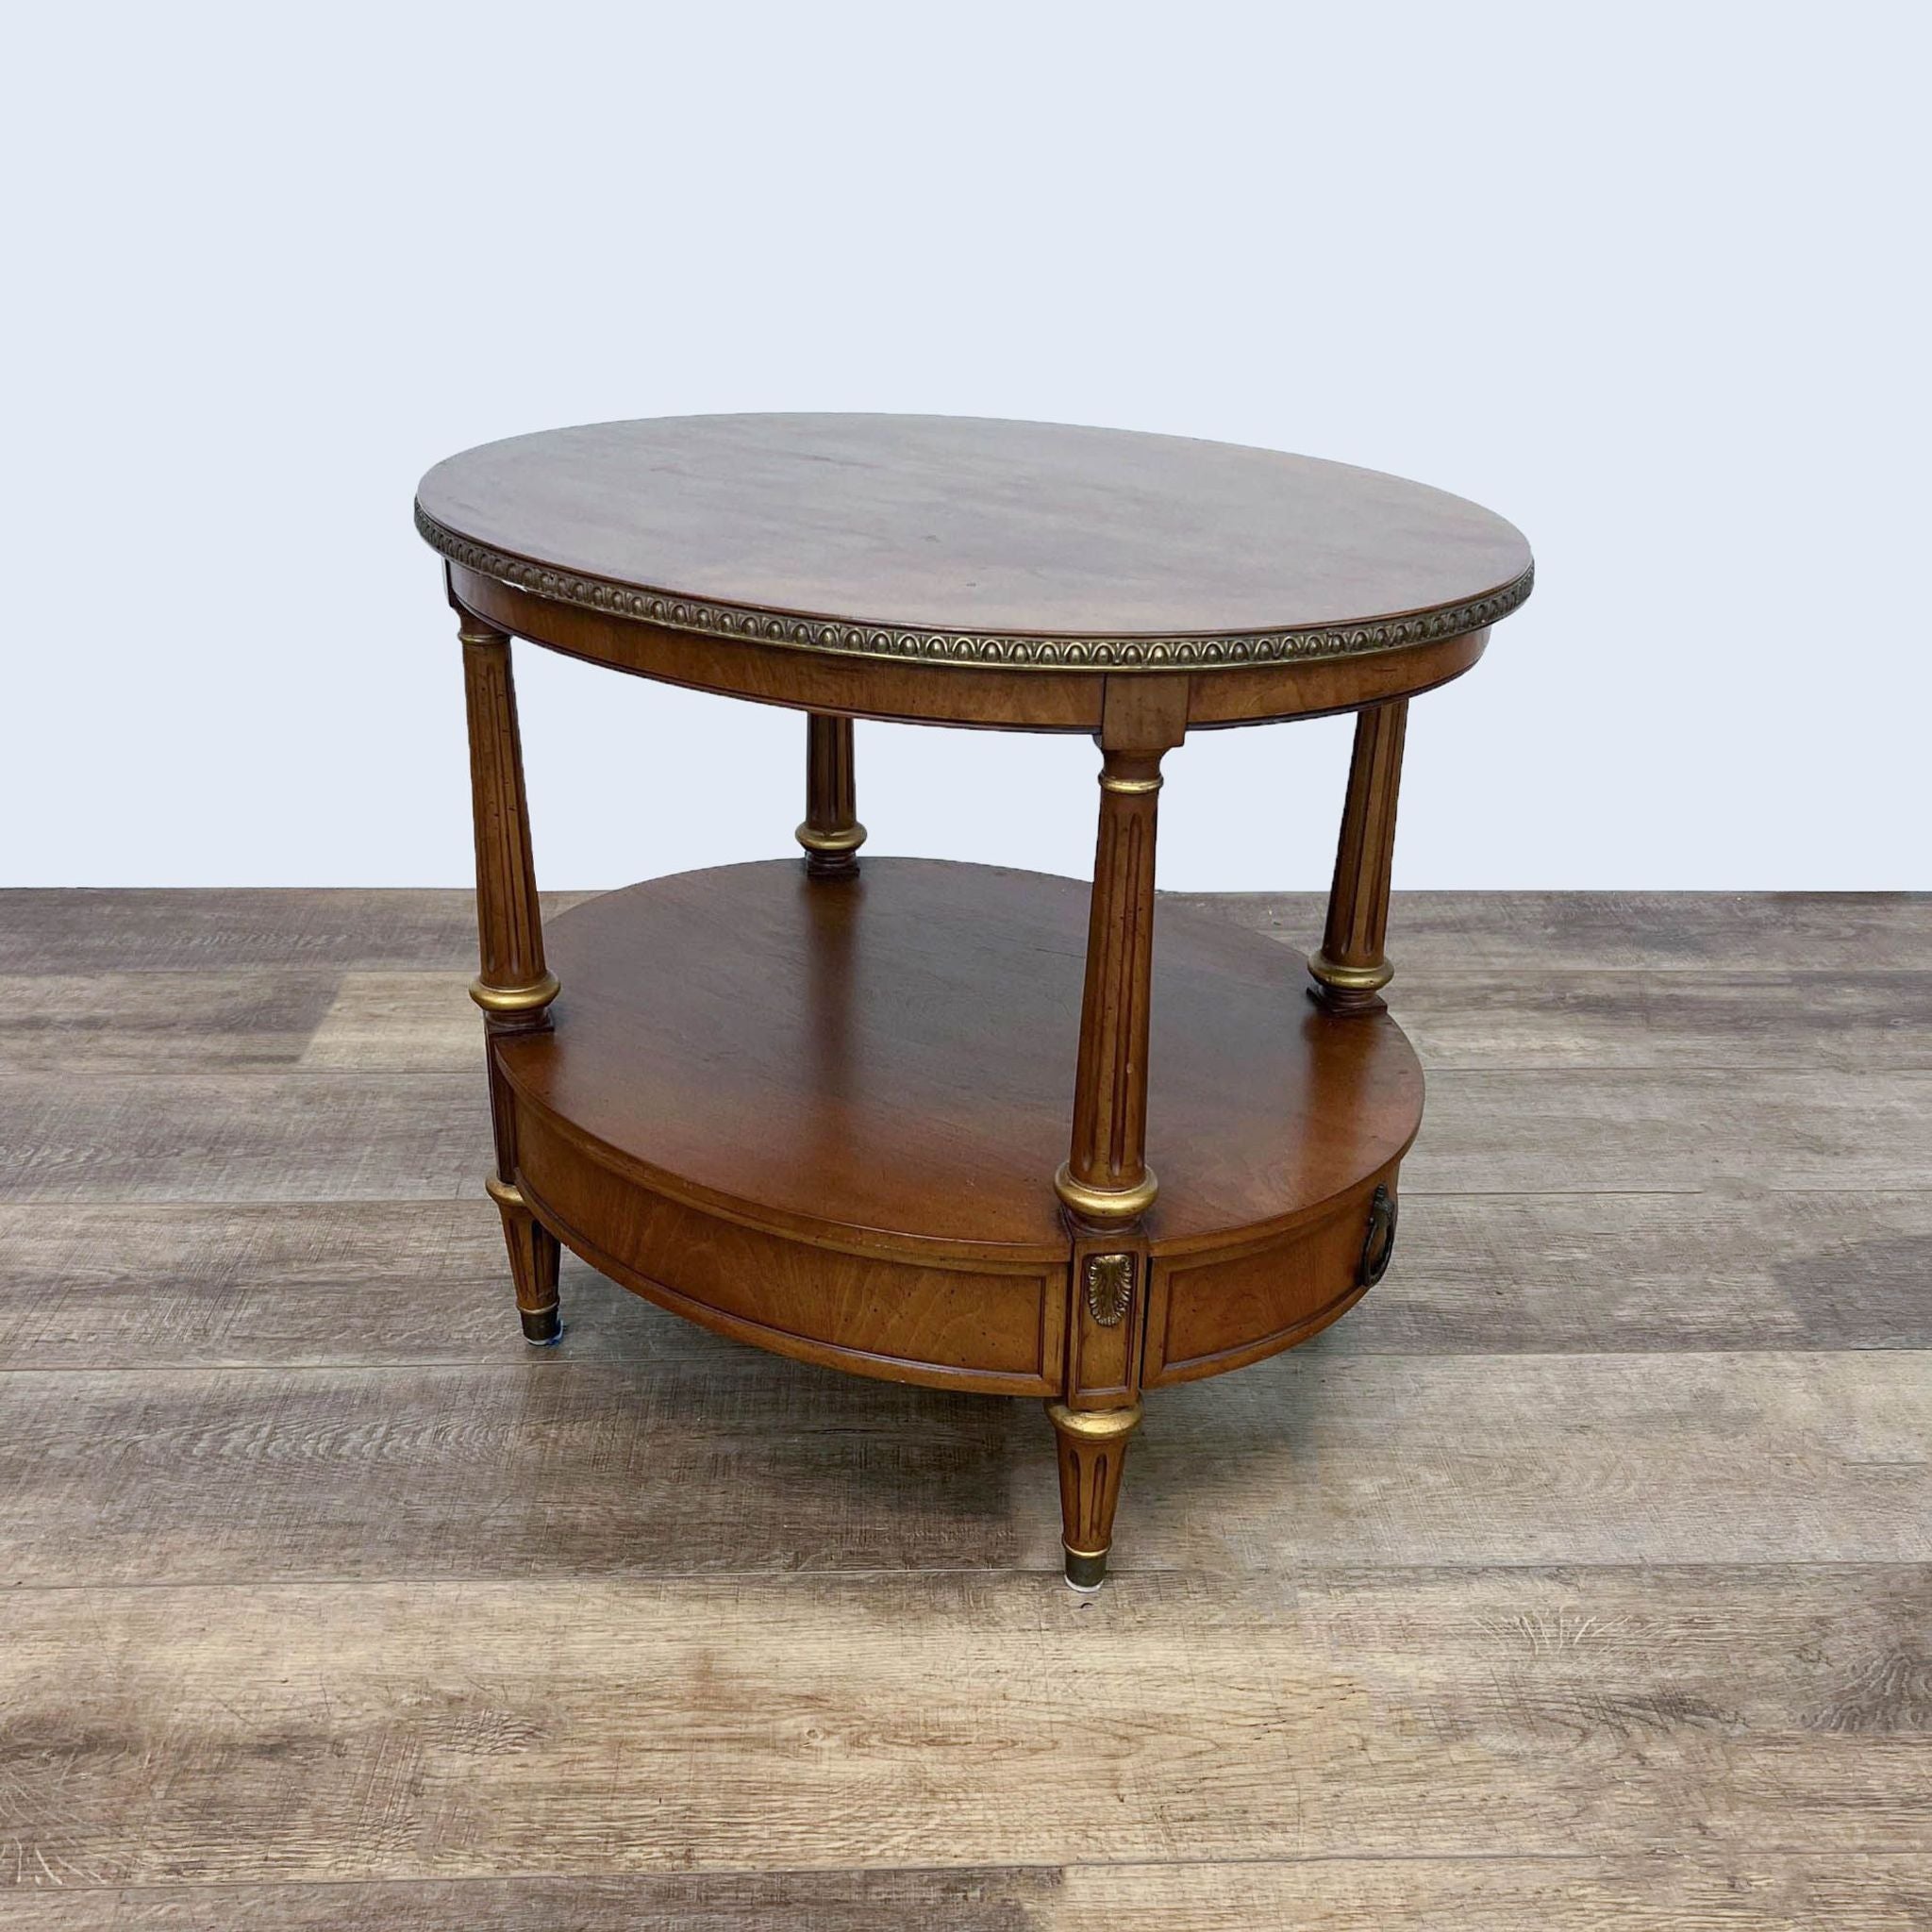 Henredon end table with fluted legs and one drawer, showcasing ornate edge detailing and a lower shelf.